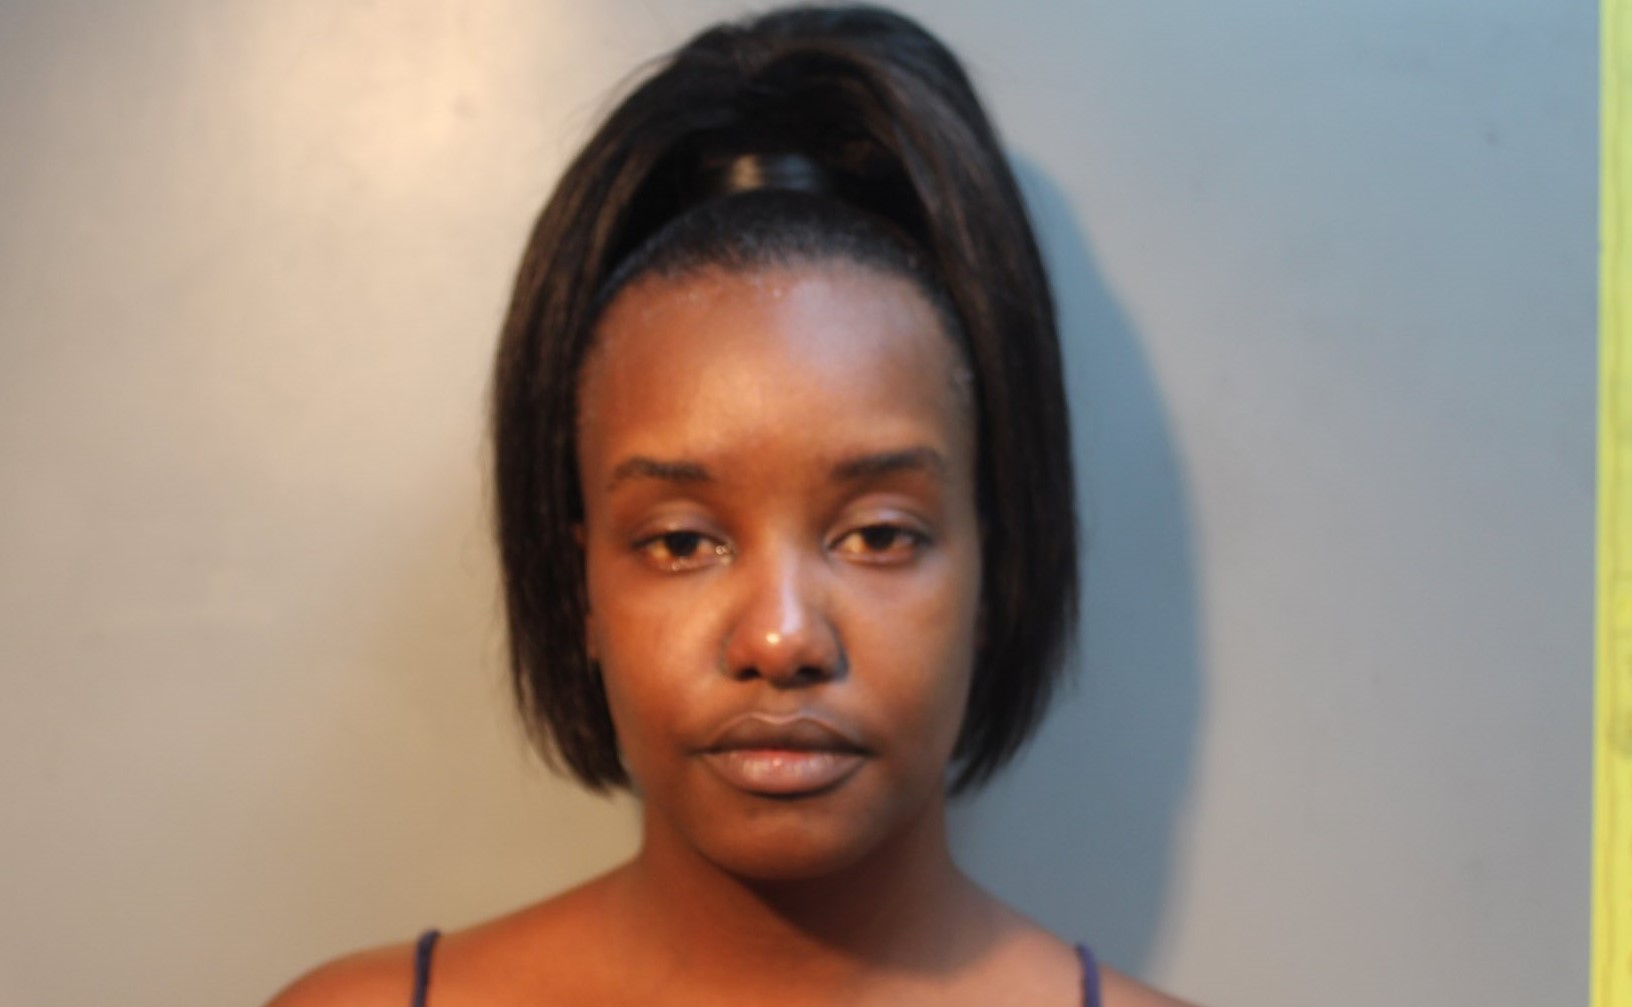 Sion Farm Woman, An Habitual Offender, Arrested As Part of Virgin Islands Anti Crime Initiative: VIPD